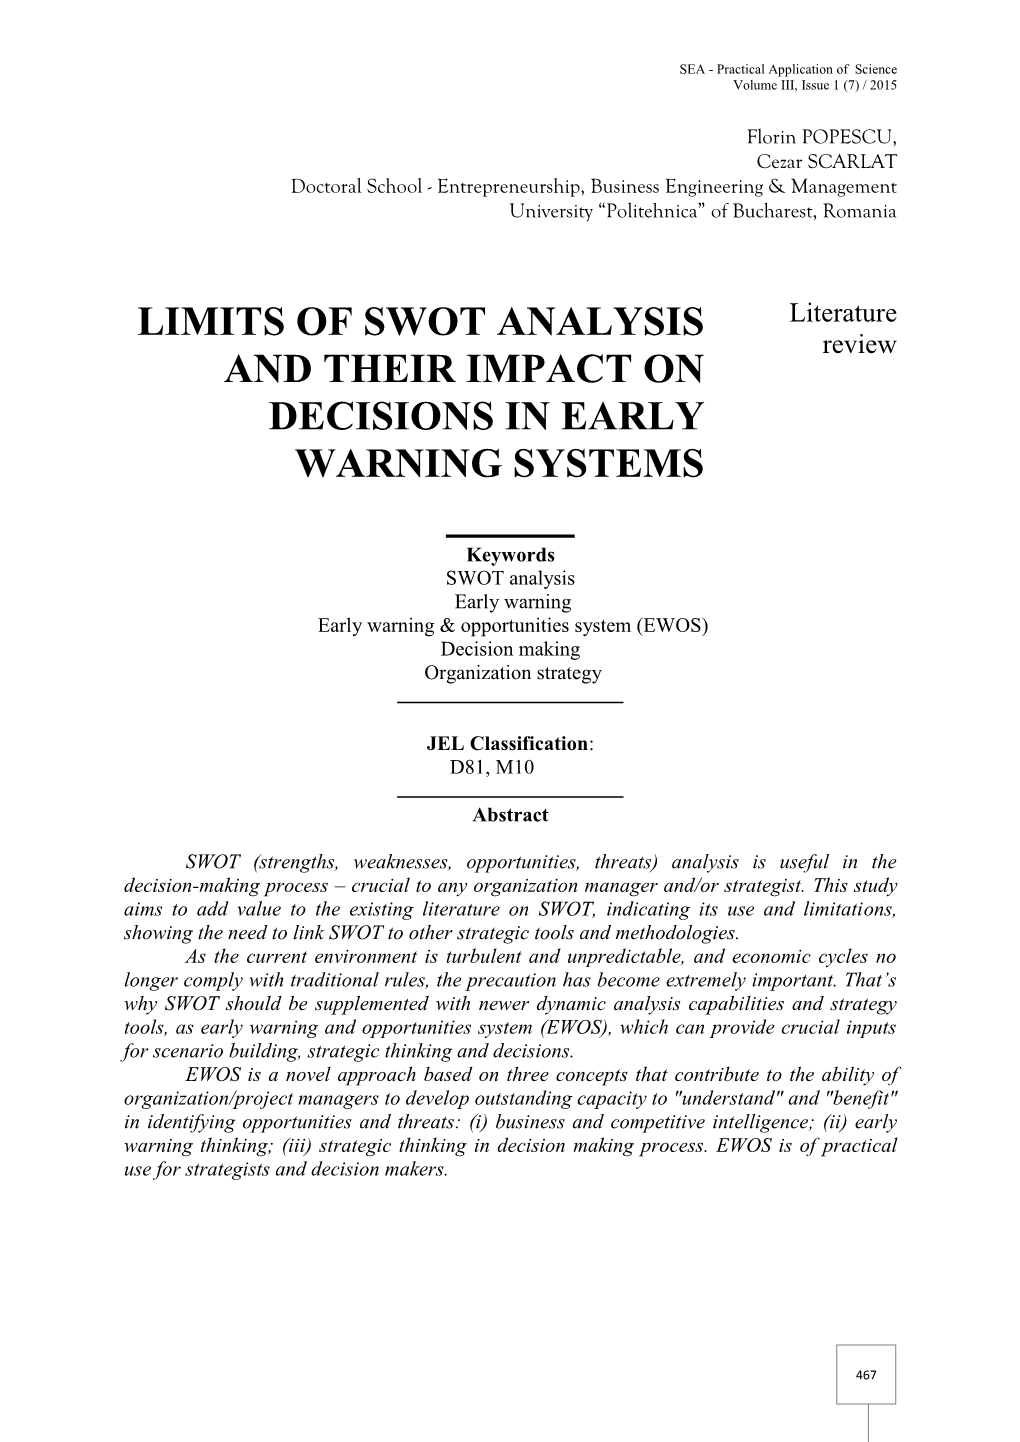 Limits of Swot Analysis and Their Impact on Decisions In